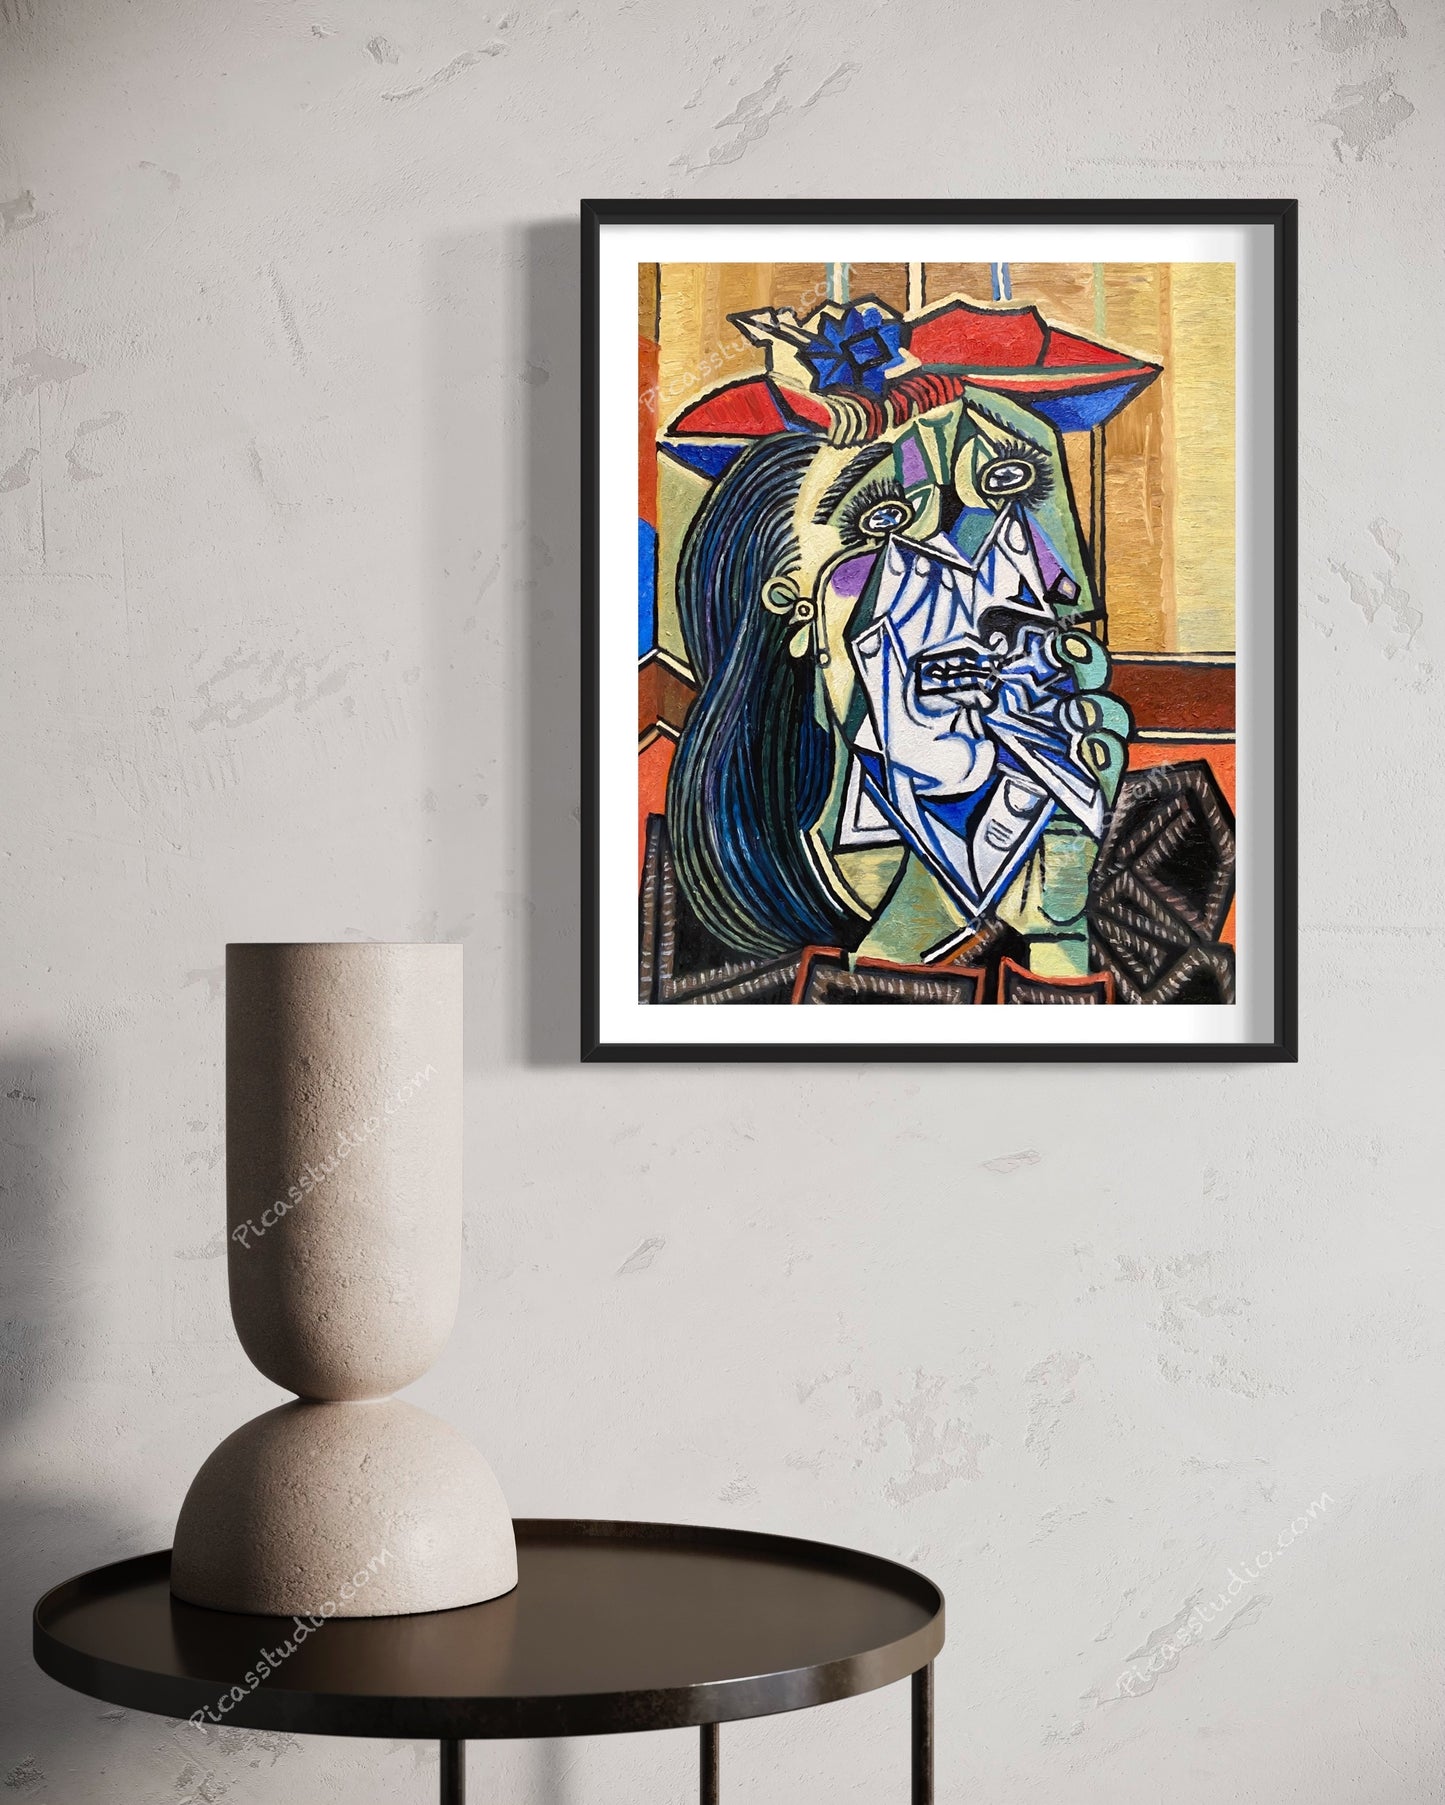 Pablo Picasso The Weeping Woman Oil Painting Hand Painted Art on Canvas Wall Decor Unframed